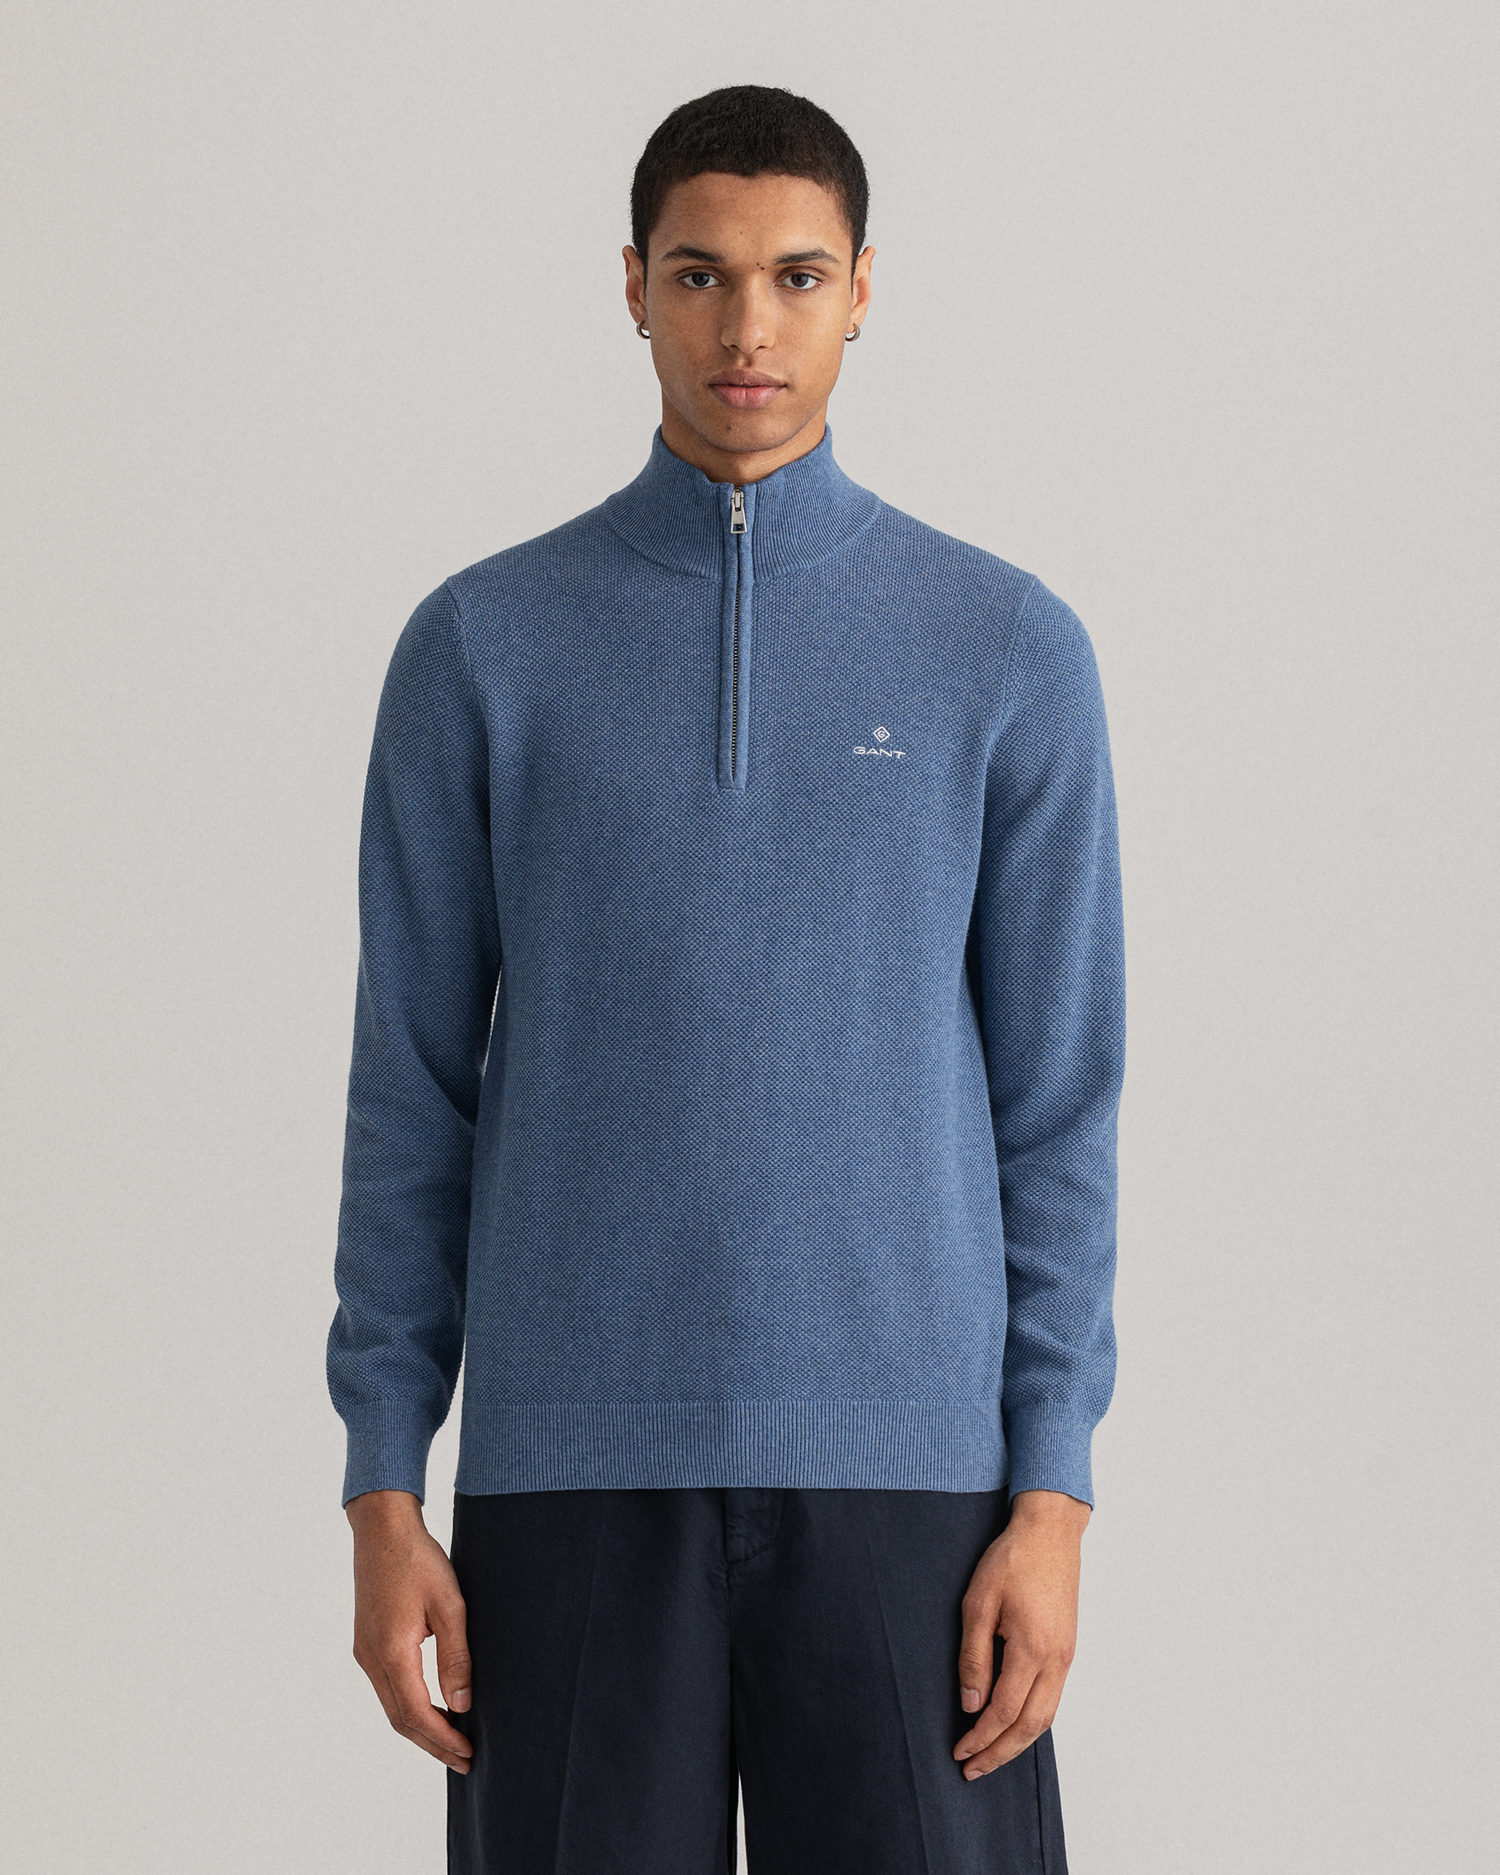 GANT Cotton Piqué Half-zip Sweater in Blue for Men Mens Clothing Sweaters and knitwear Zipped sweaters 